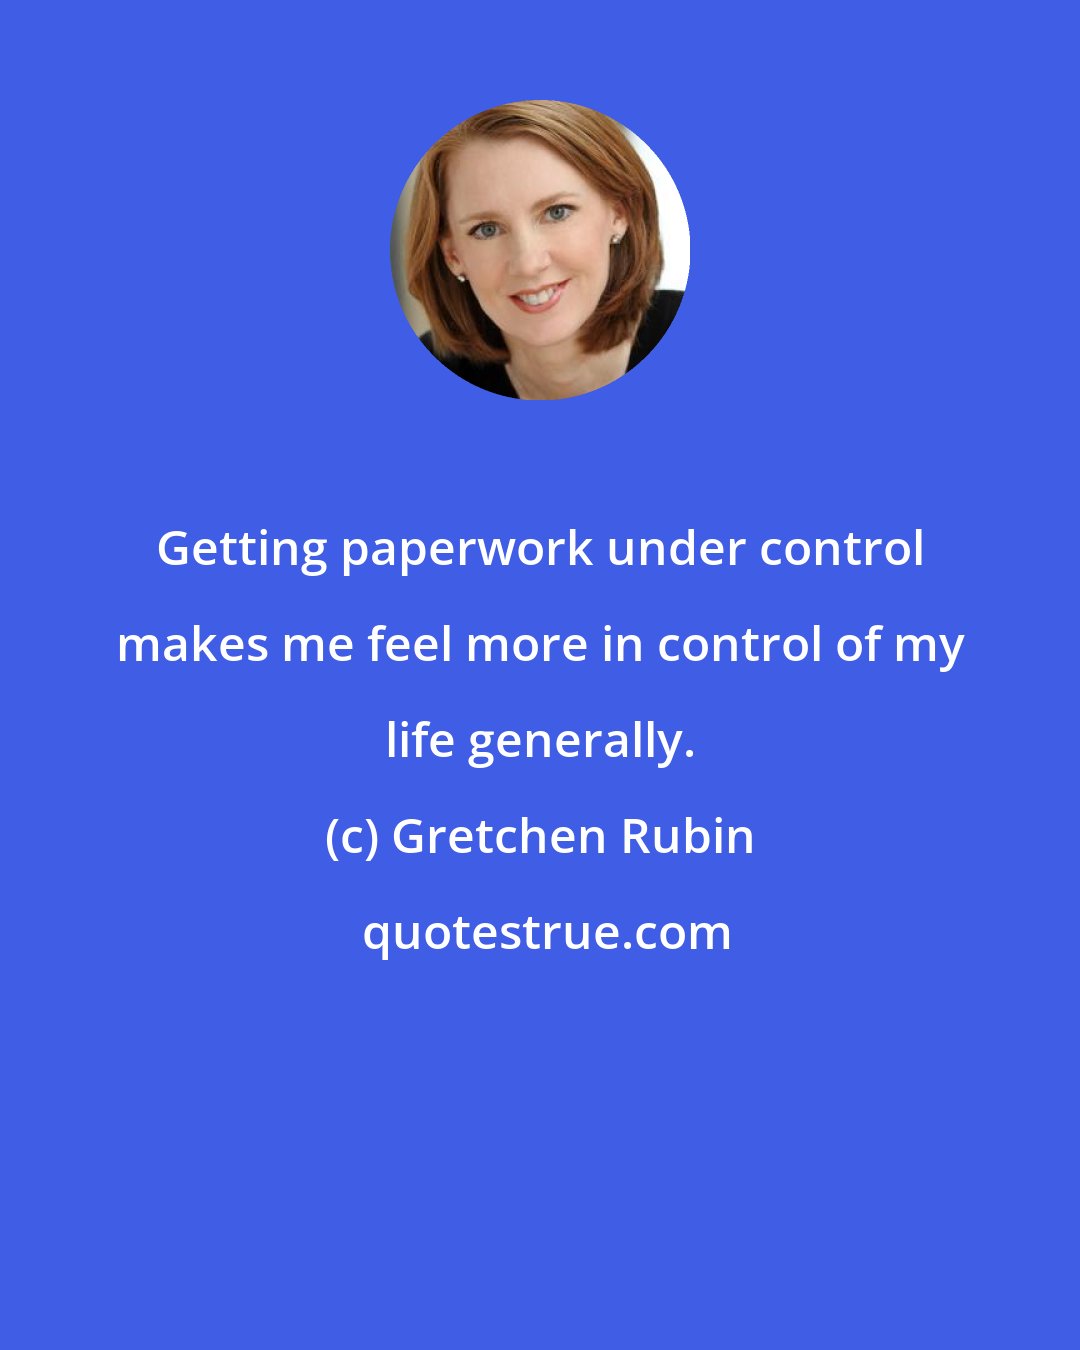 Gretchen Rubin: Getting paperwork under control makes me feel more in control of my life generally.